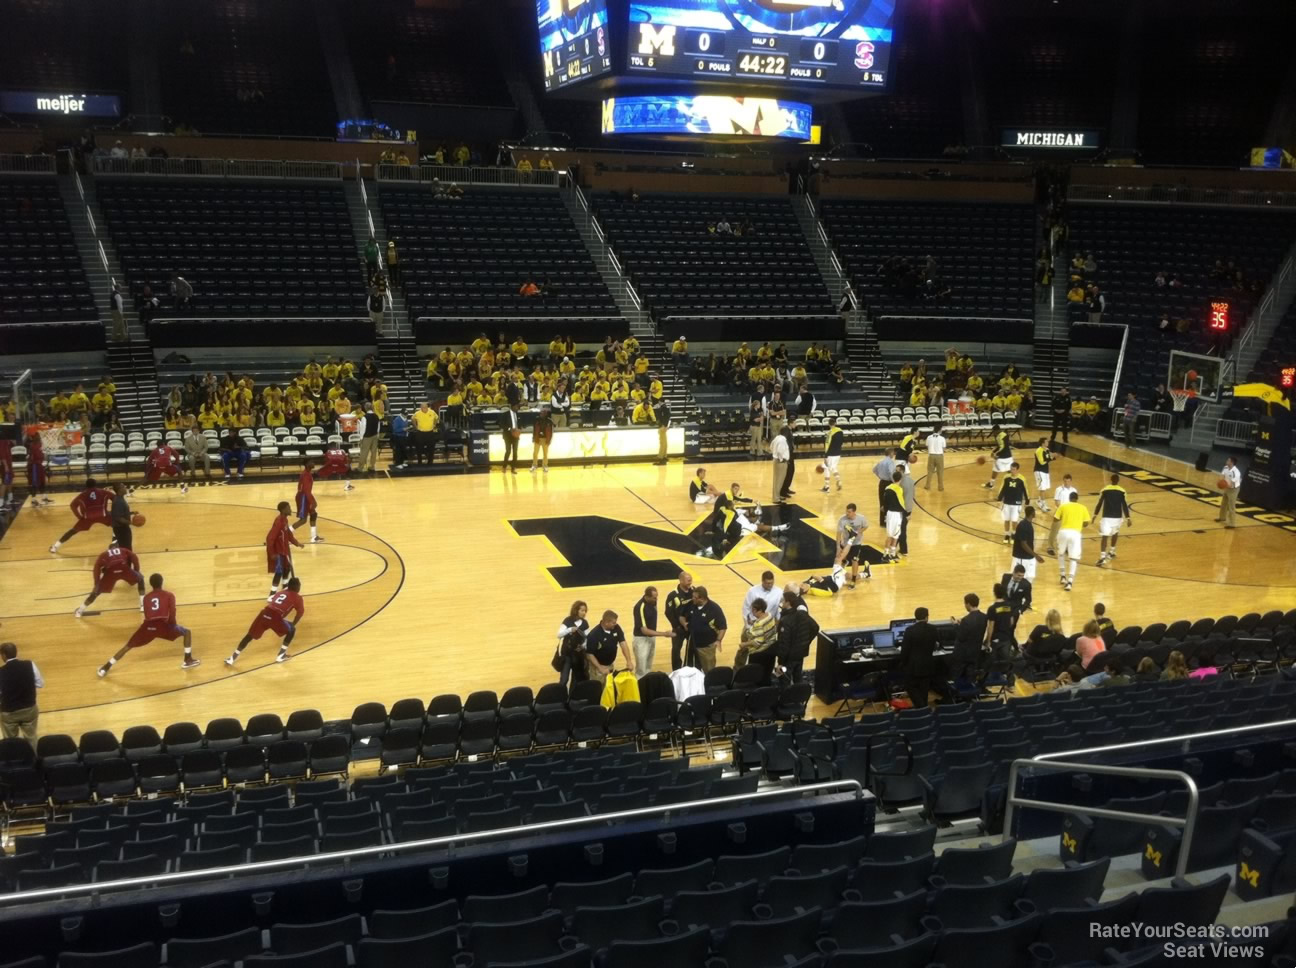 Crisler Arena Seating Chart With Rows